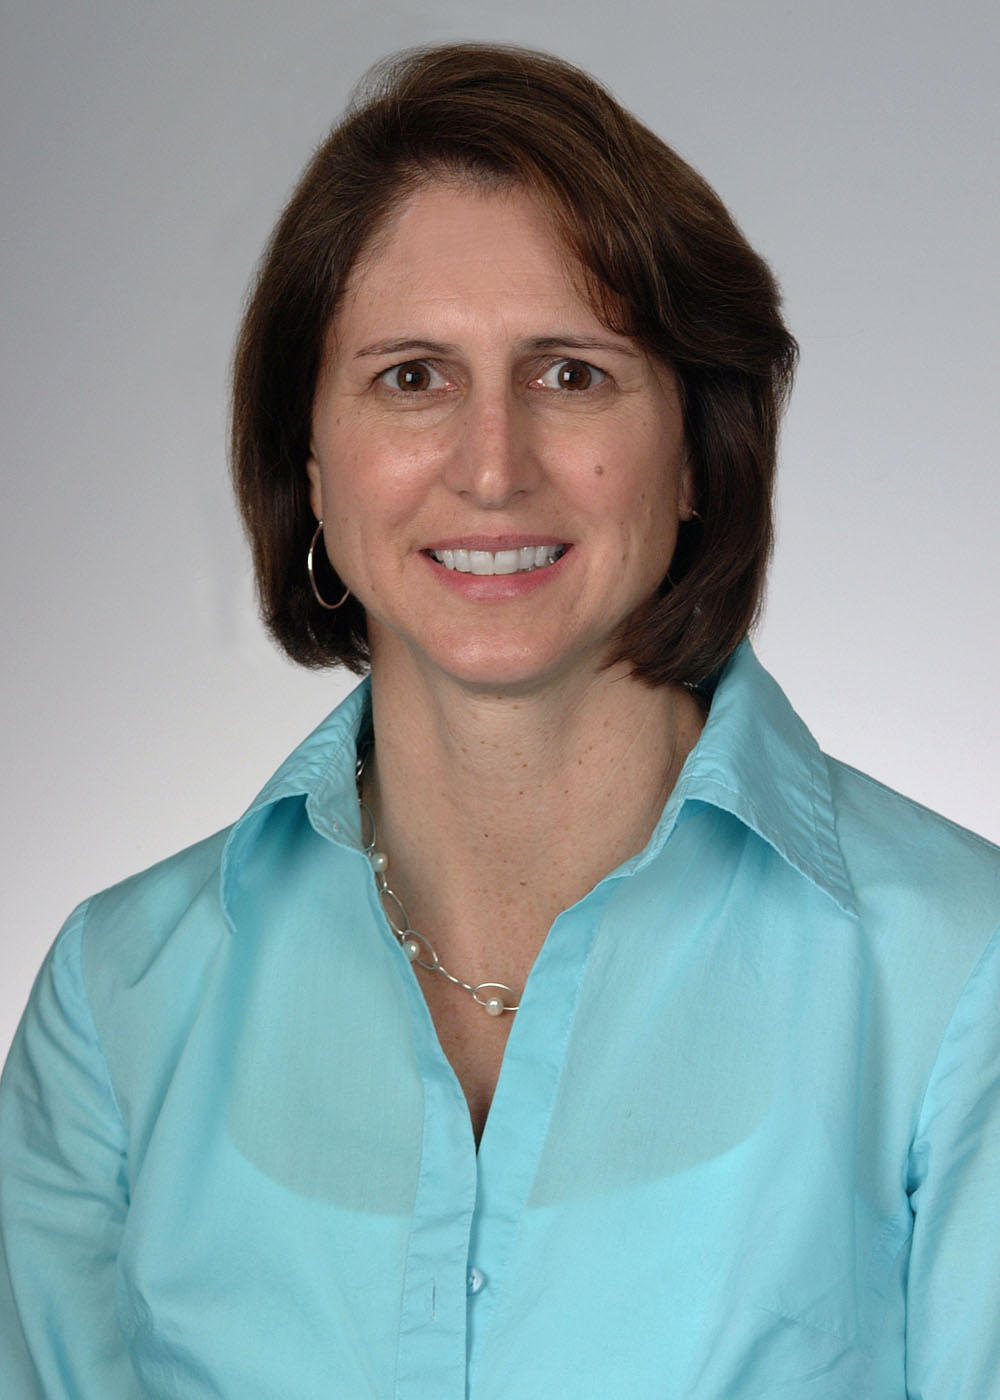 Mary Noreen Sagedy Herring, MD